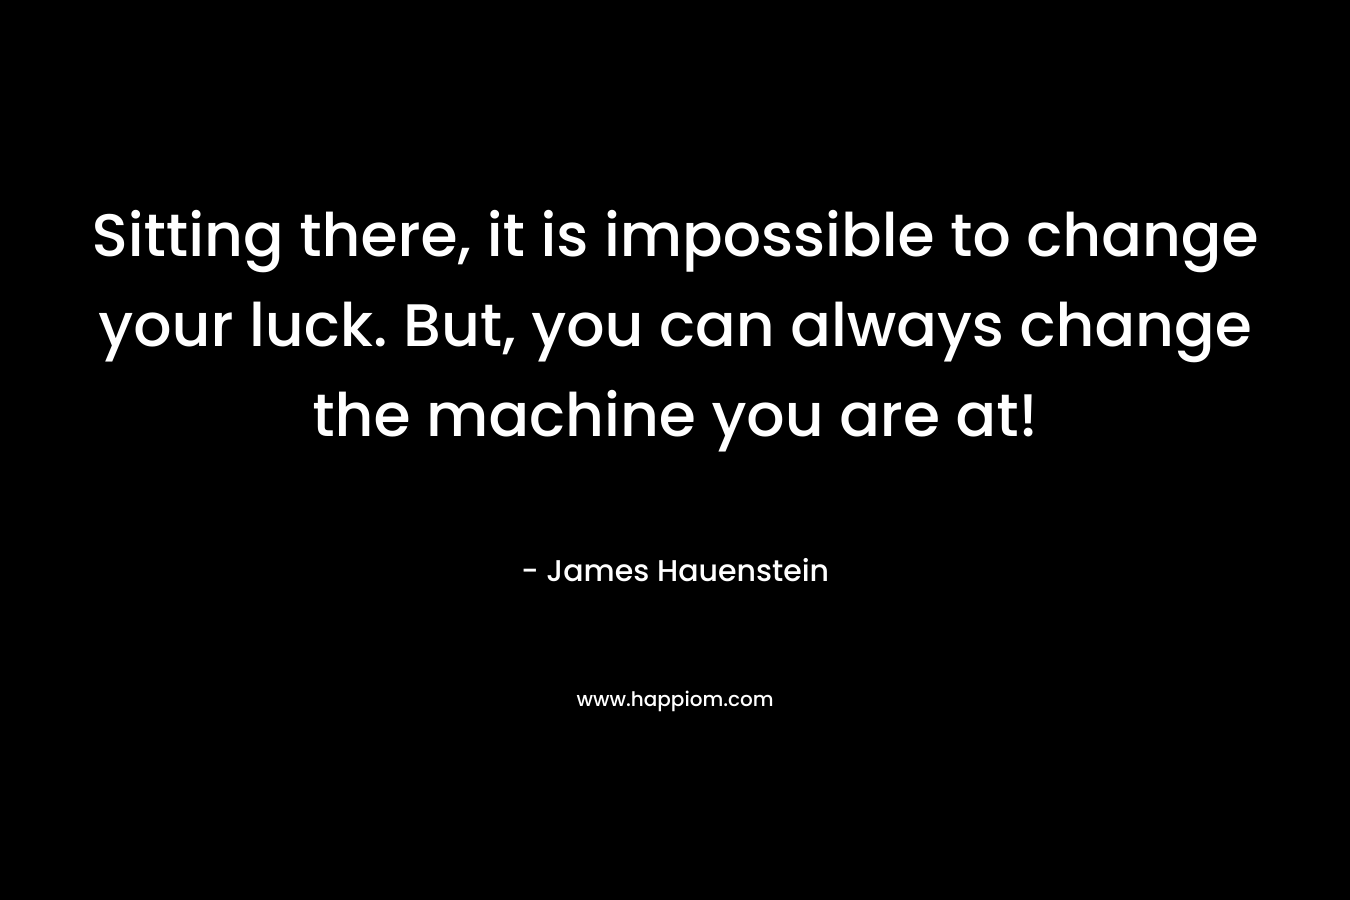 Sitting there, it is impossible to change your luck. But, you can always change the machine you are at!